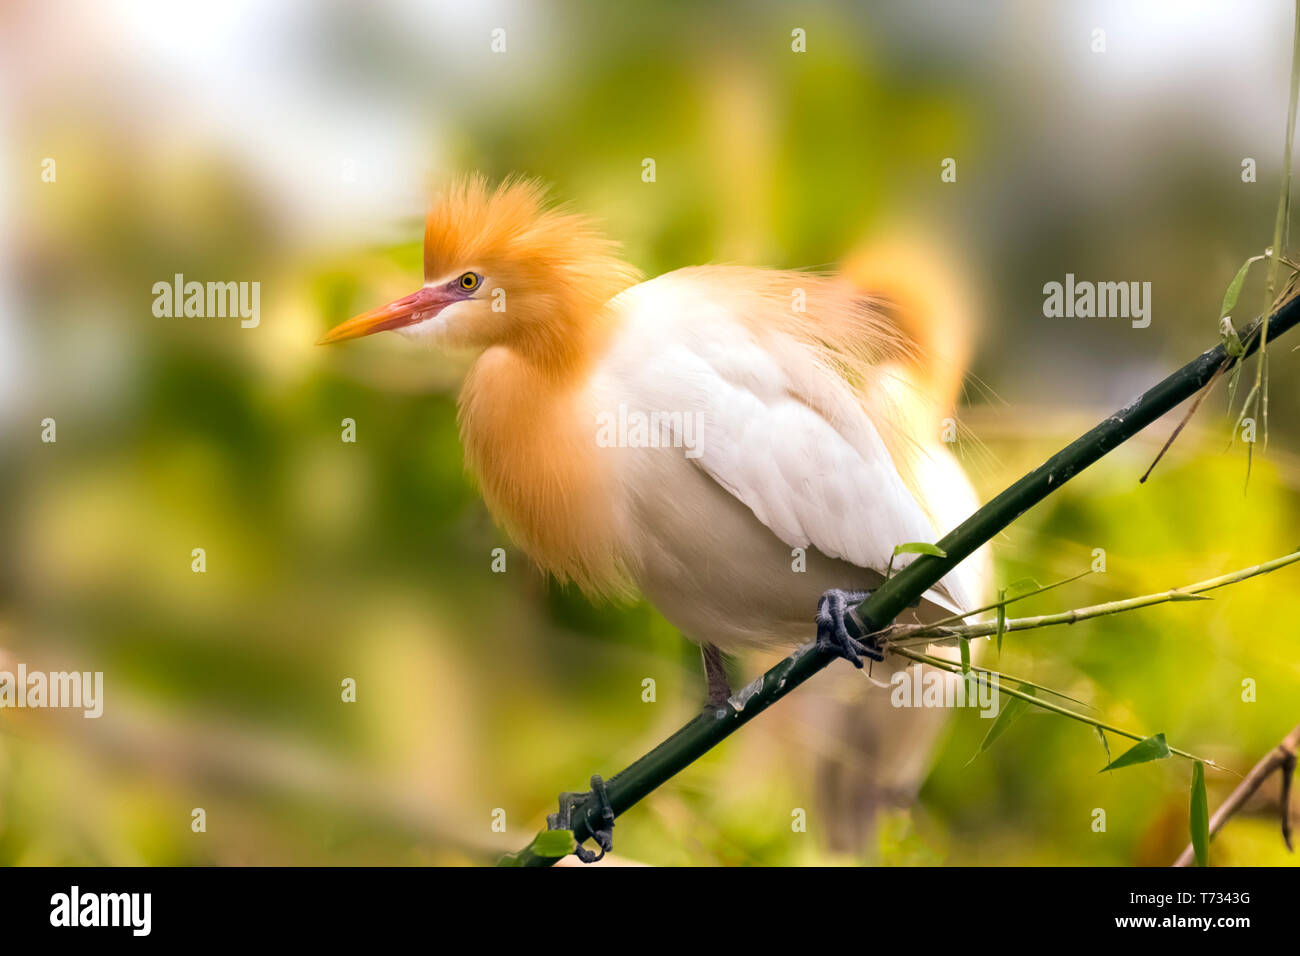 White Cattle egret is found in the bamboo trees lakeside Pokhara Nepal. more than hundred egrets birds with nests that was breeding season. Stock Photo